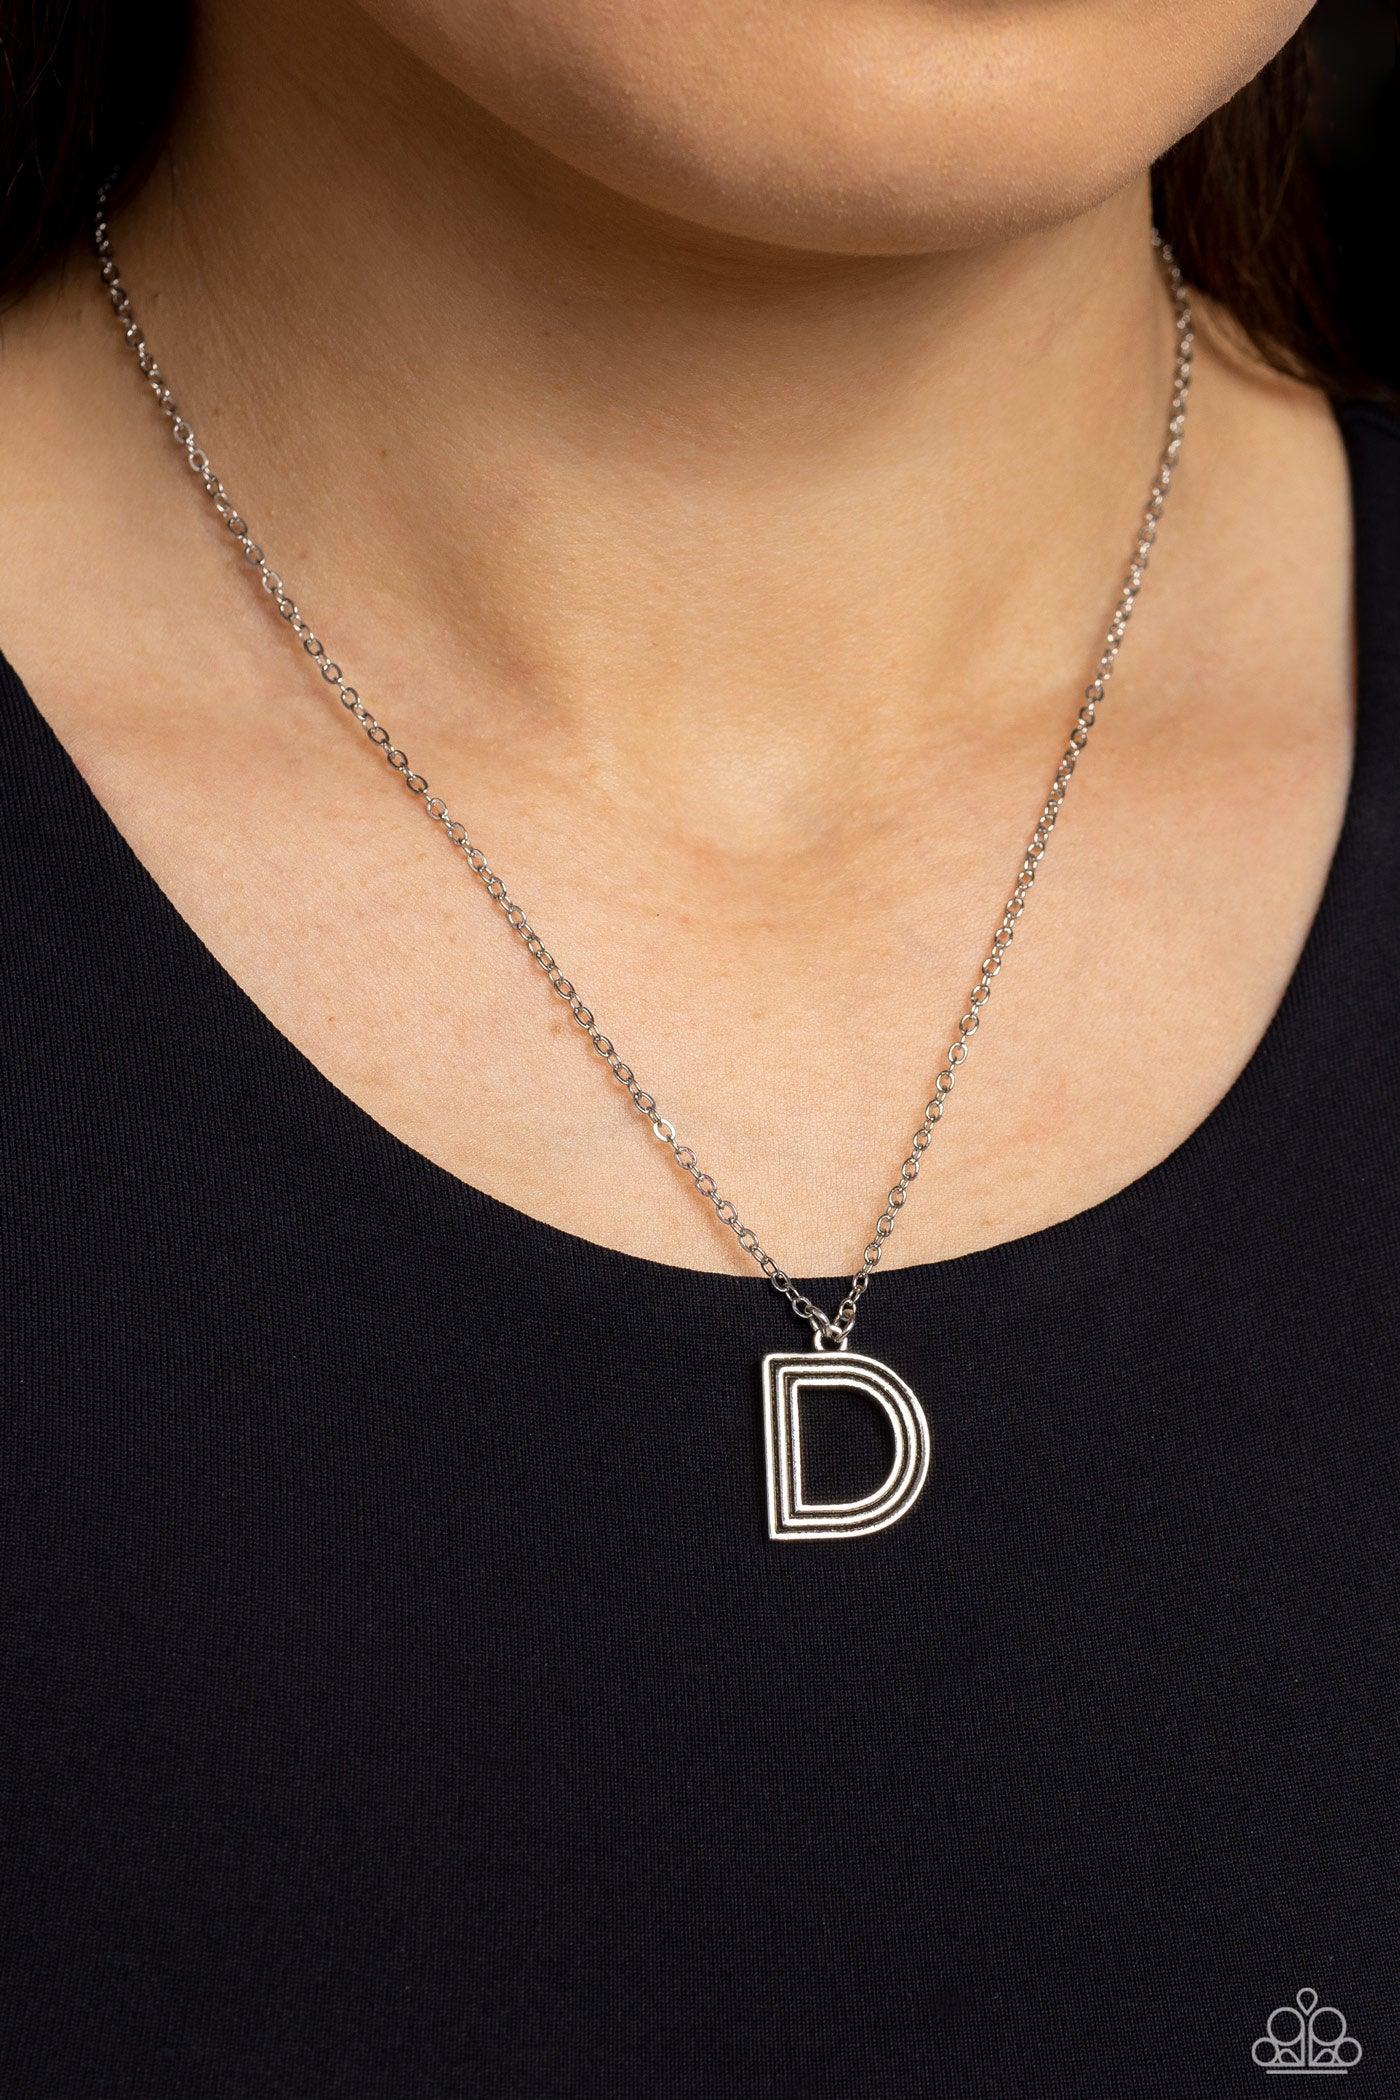 Paparazzi Accessories - Leave Your Initials - Silver - D Necklace - Bling by JessieK